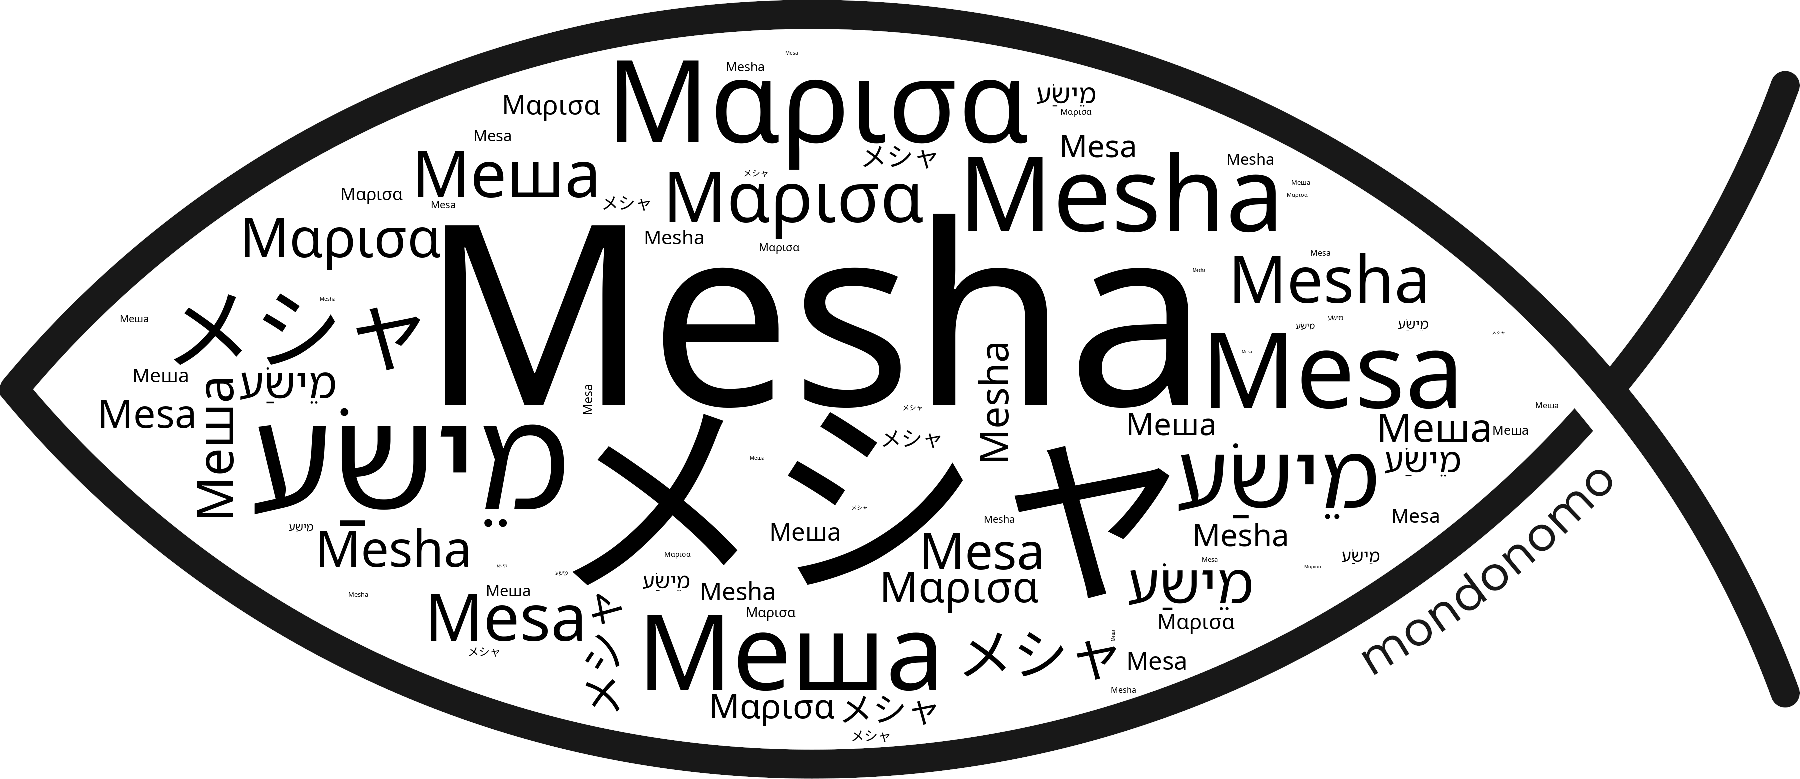 Name Mesha in the world's Bibles